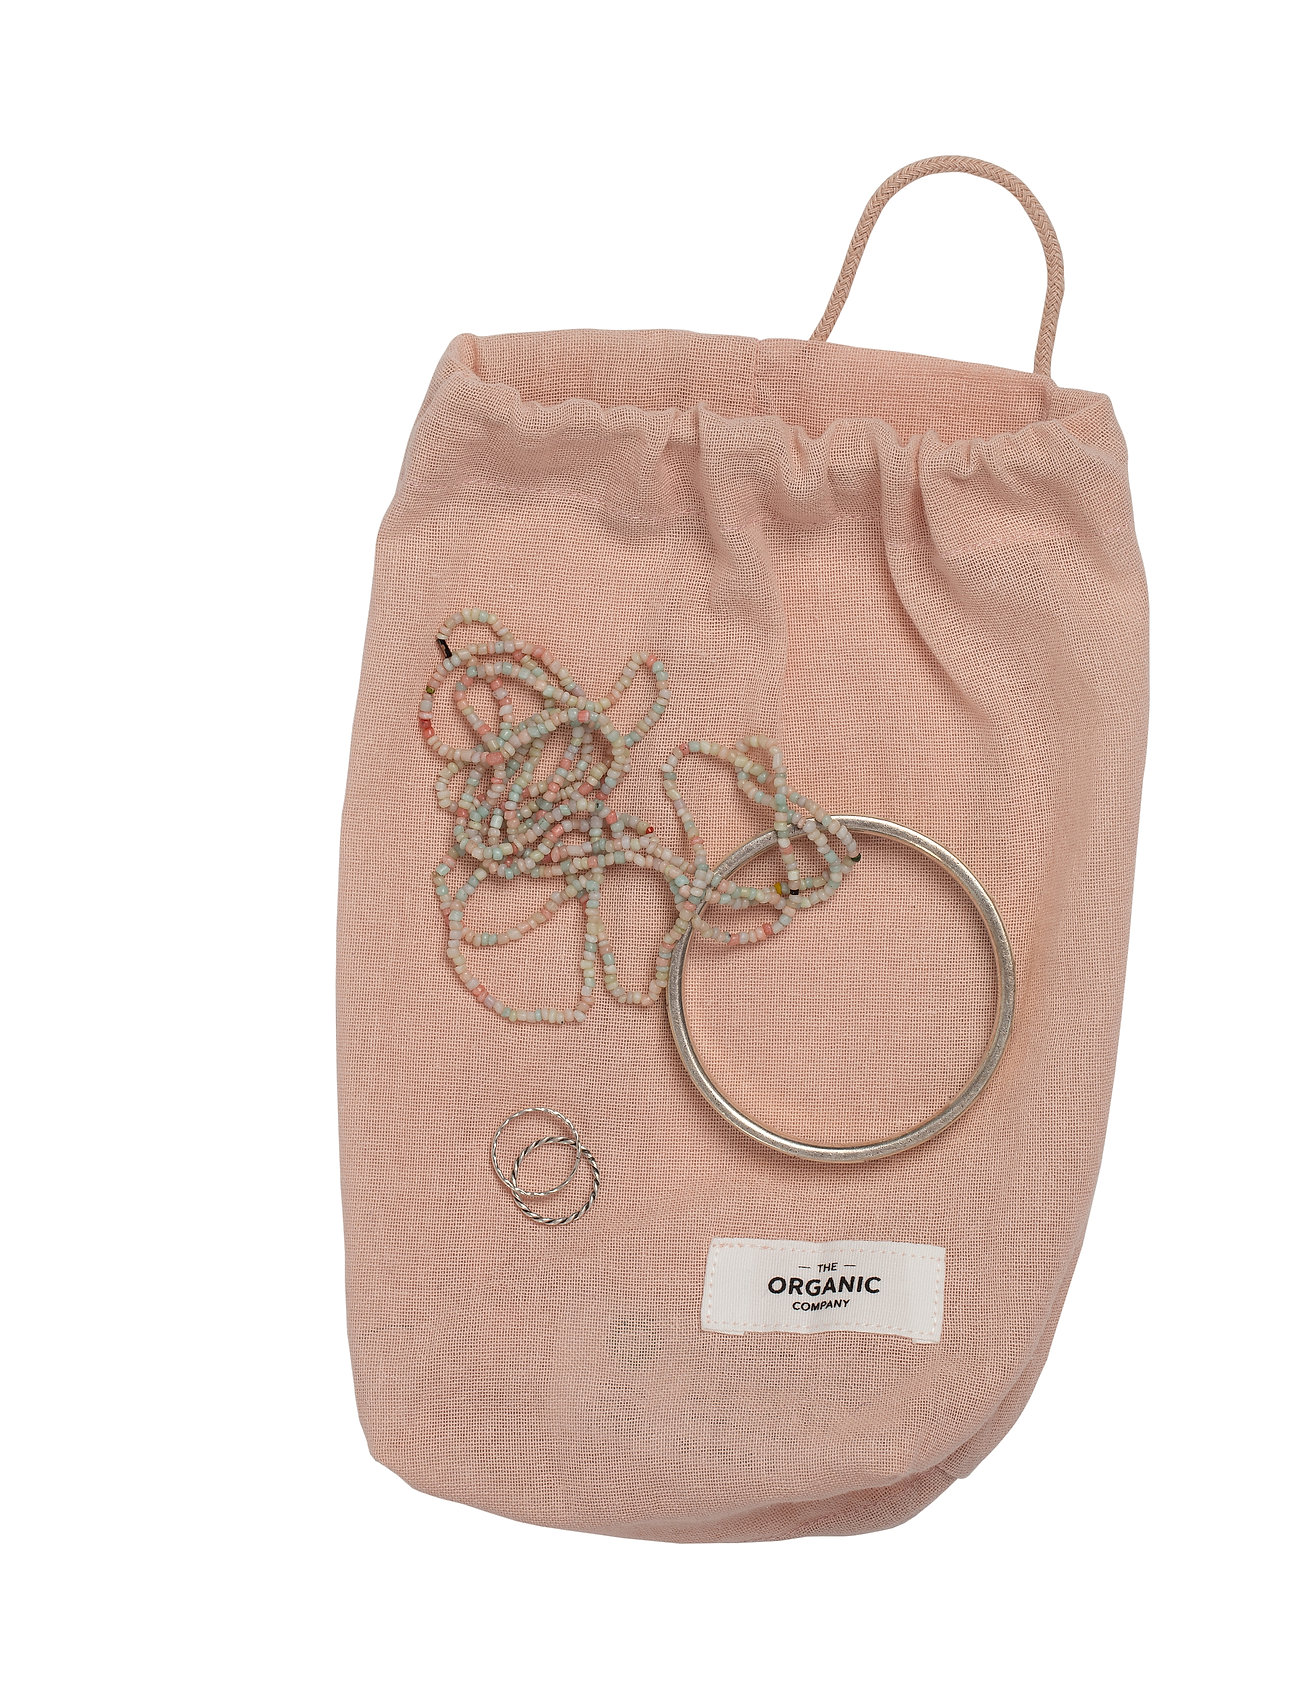 The Organic Company - All Purpose Bag Small - aufbewahrungstaschen - 331 pale rose - 1